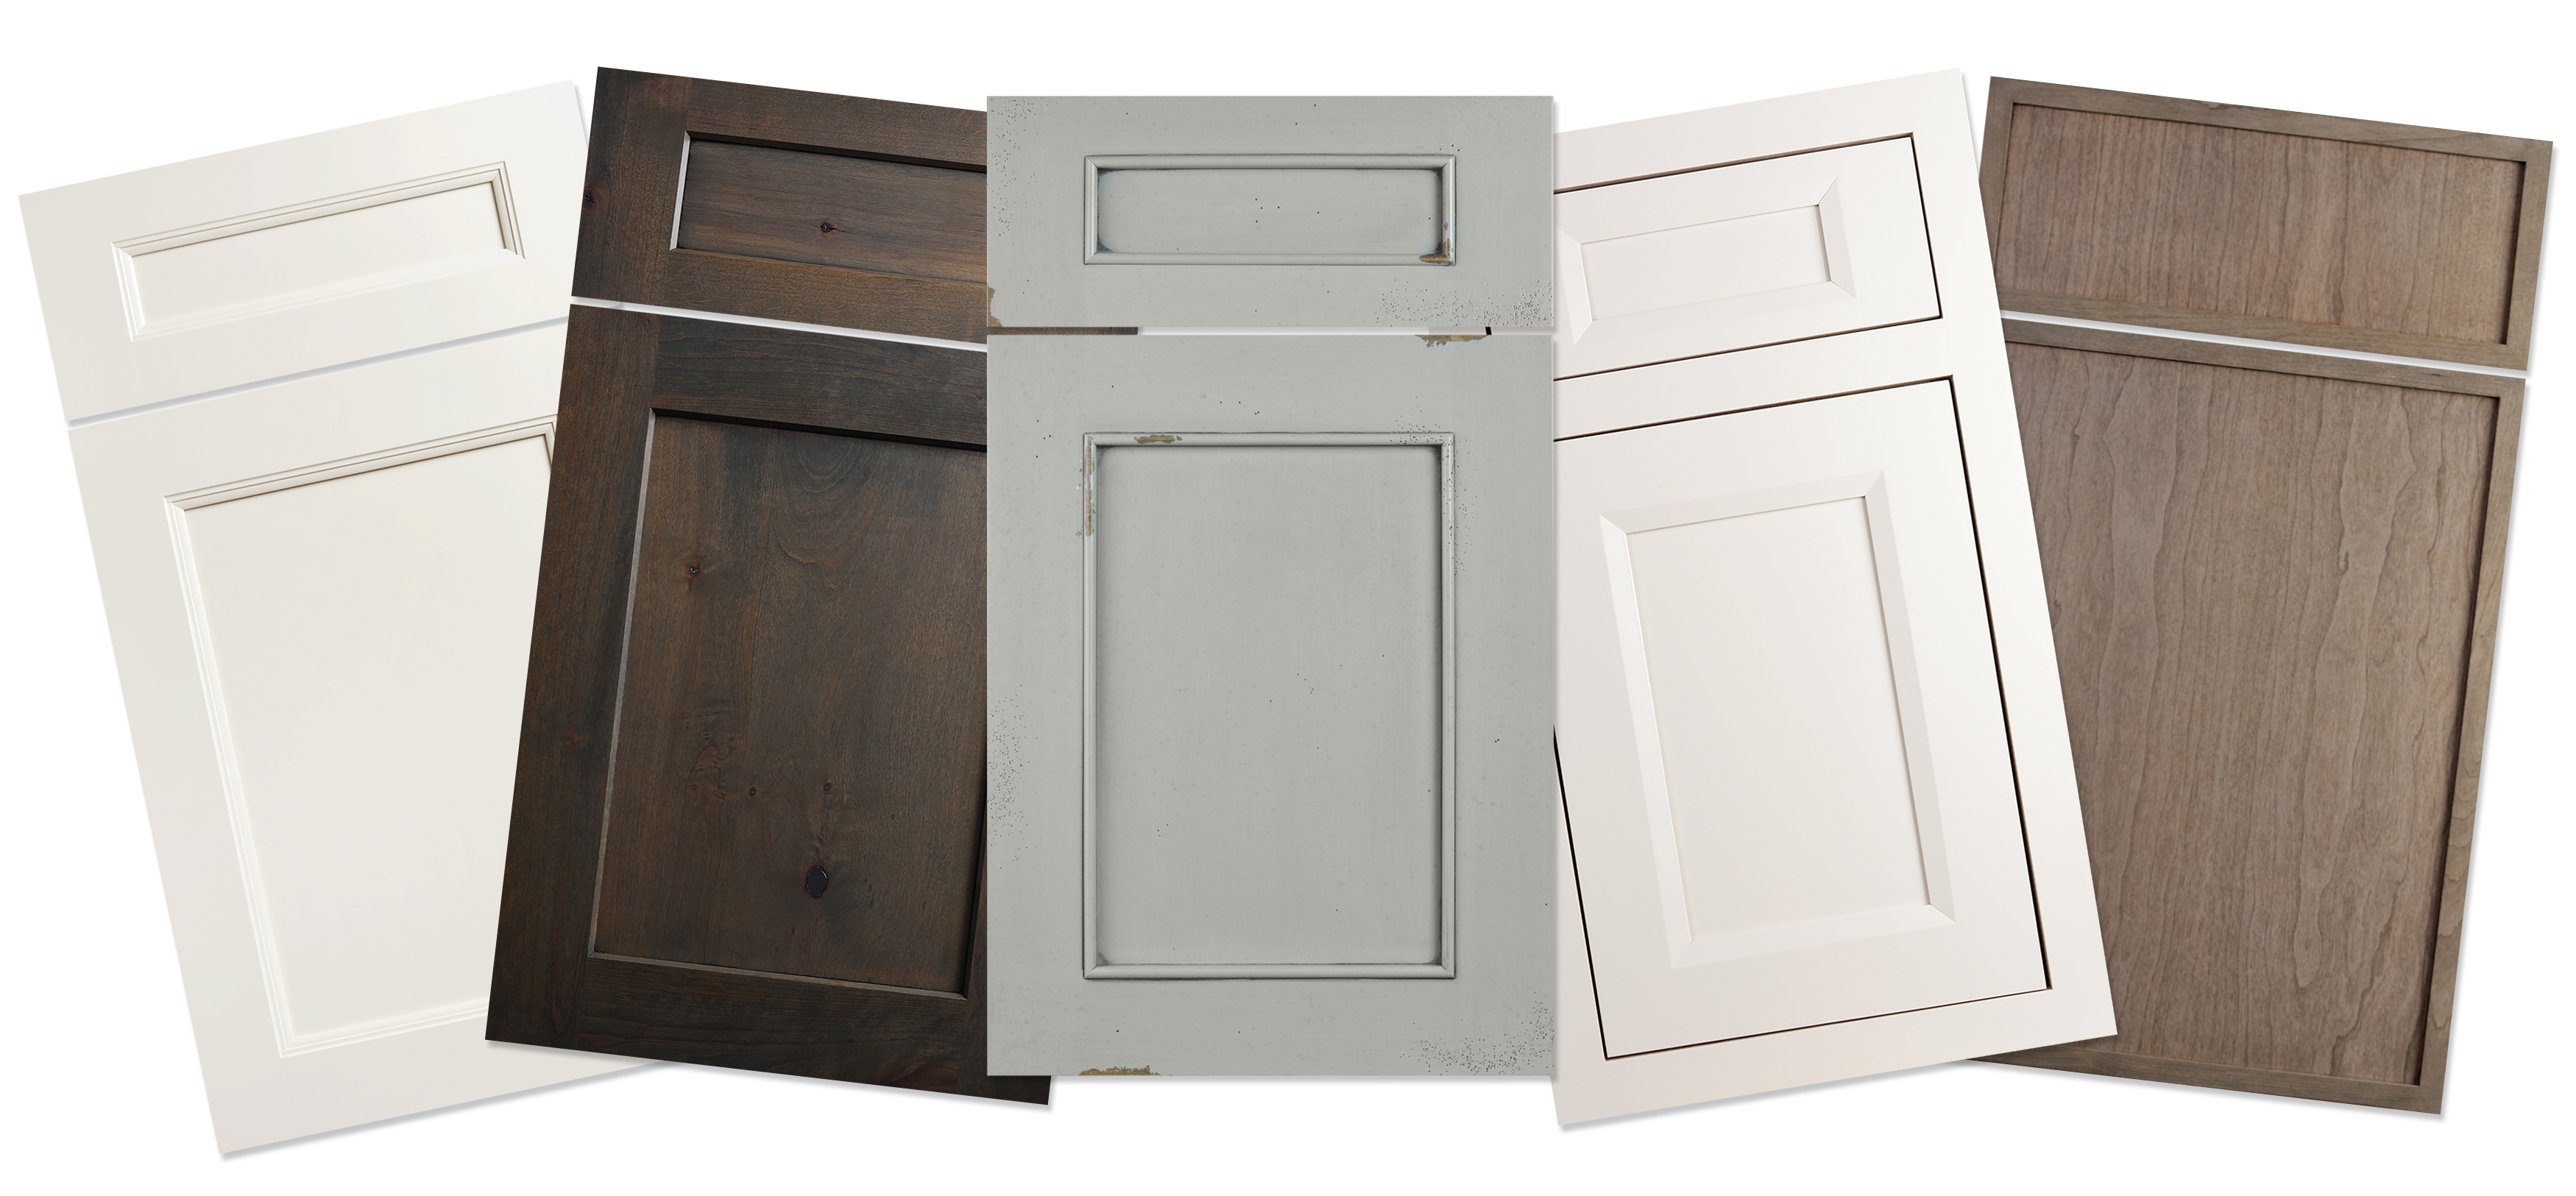 Flat Panel door styles from Dura Supreme Cabinetry